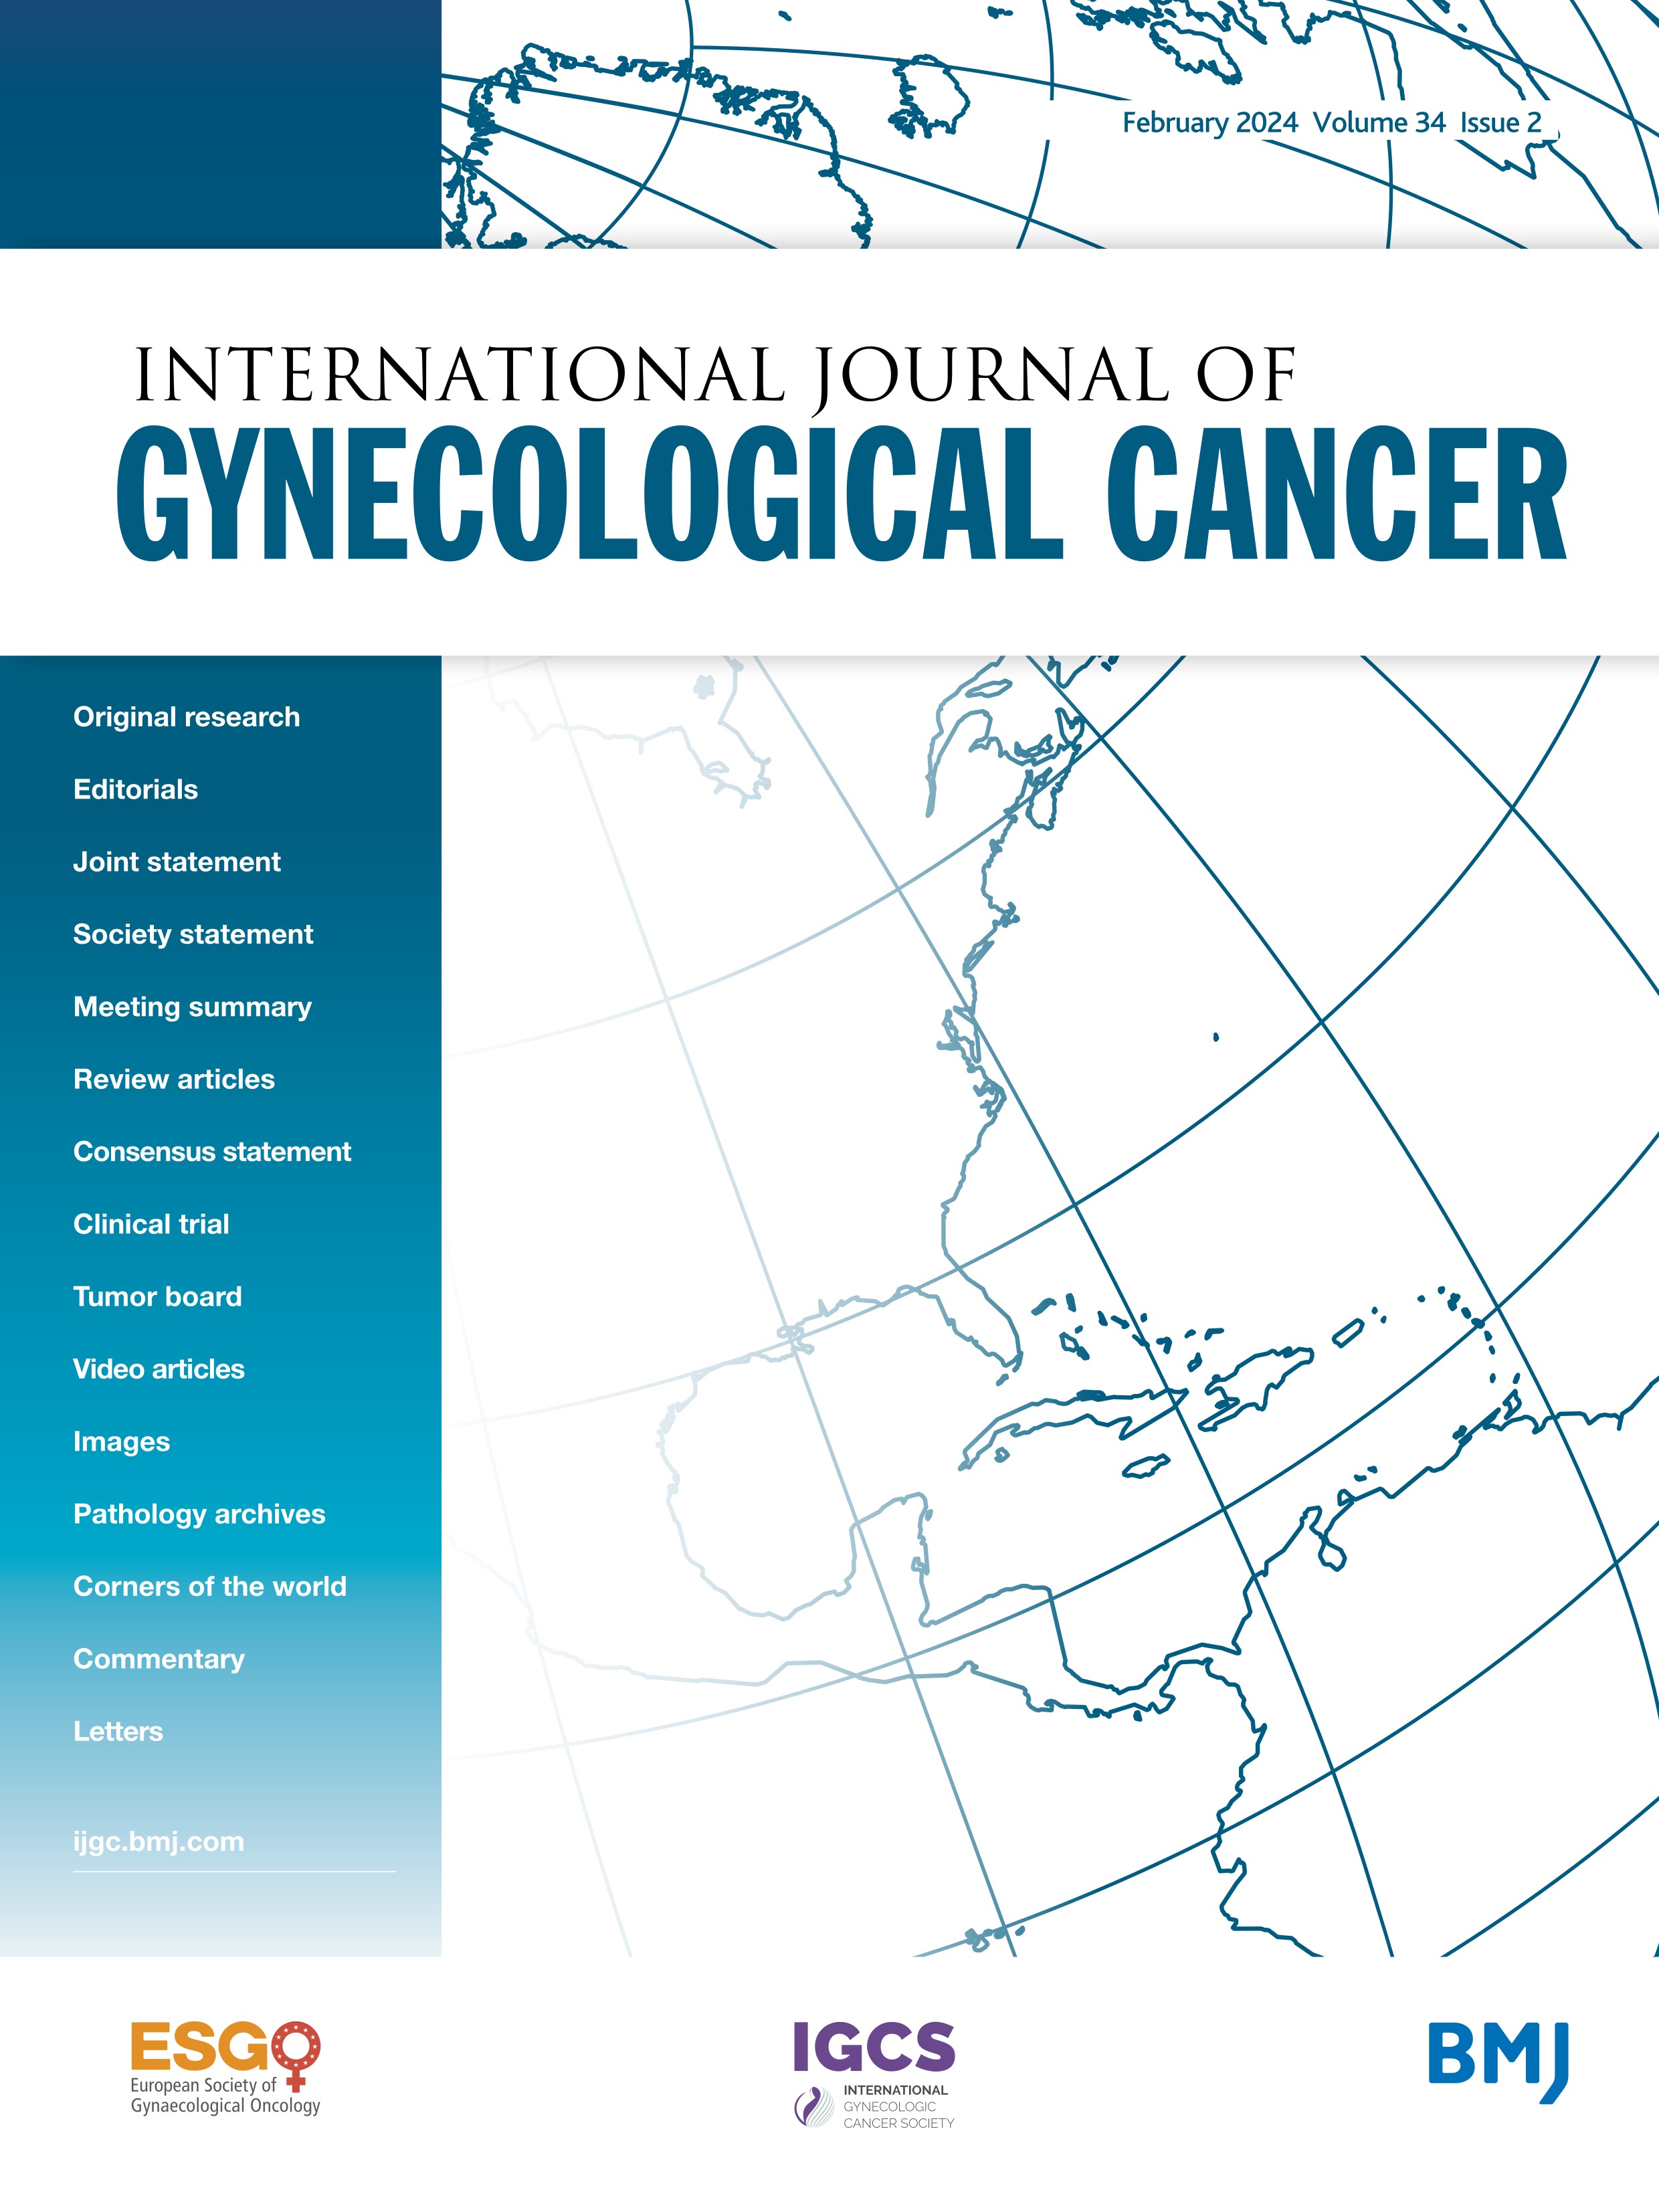 The tug of war: delivering safe gynecologic oncology treatment amid insecurity in Haiti